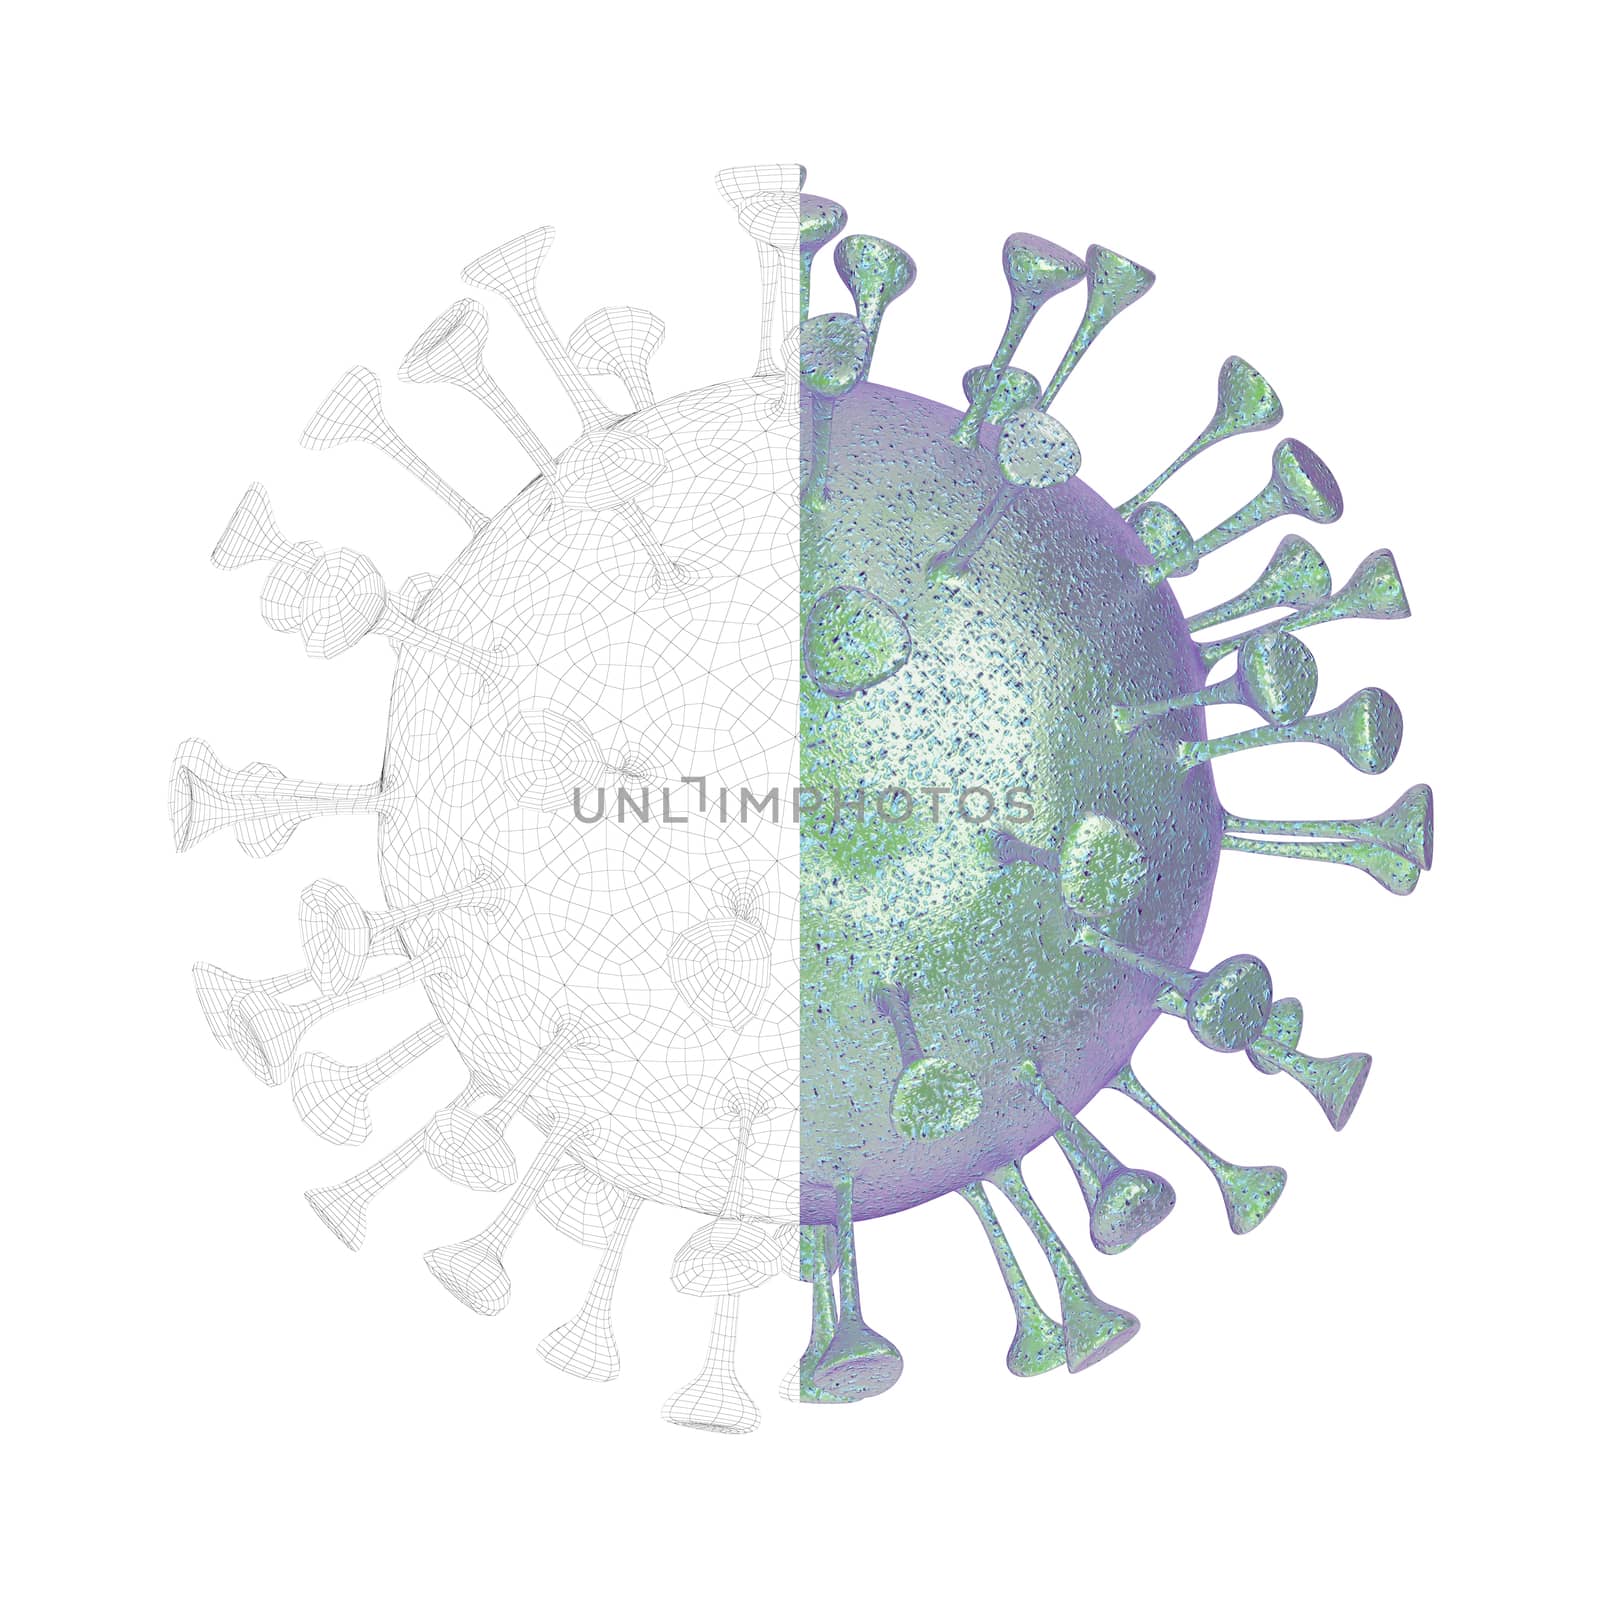 3D render of virus by magraphics